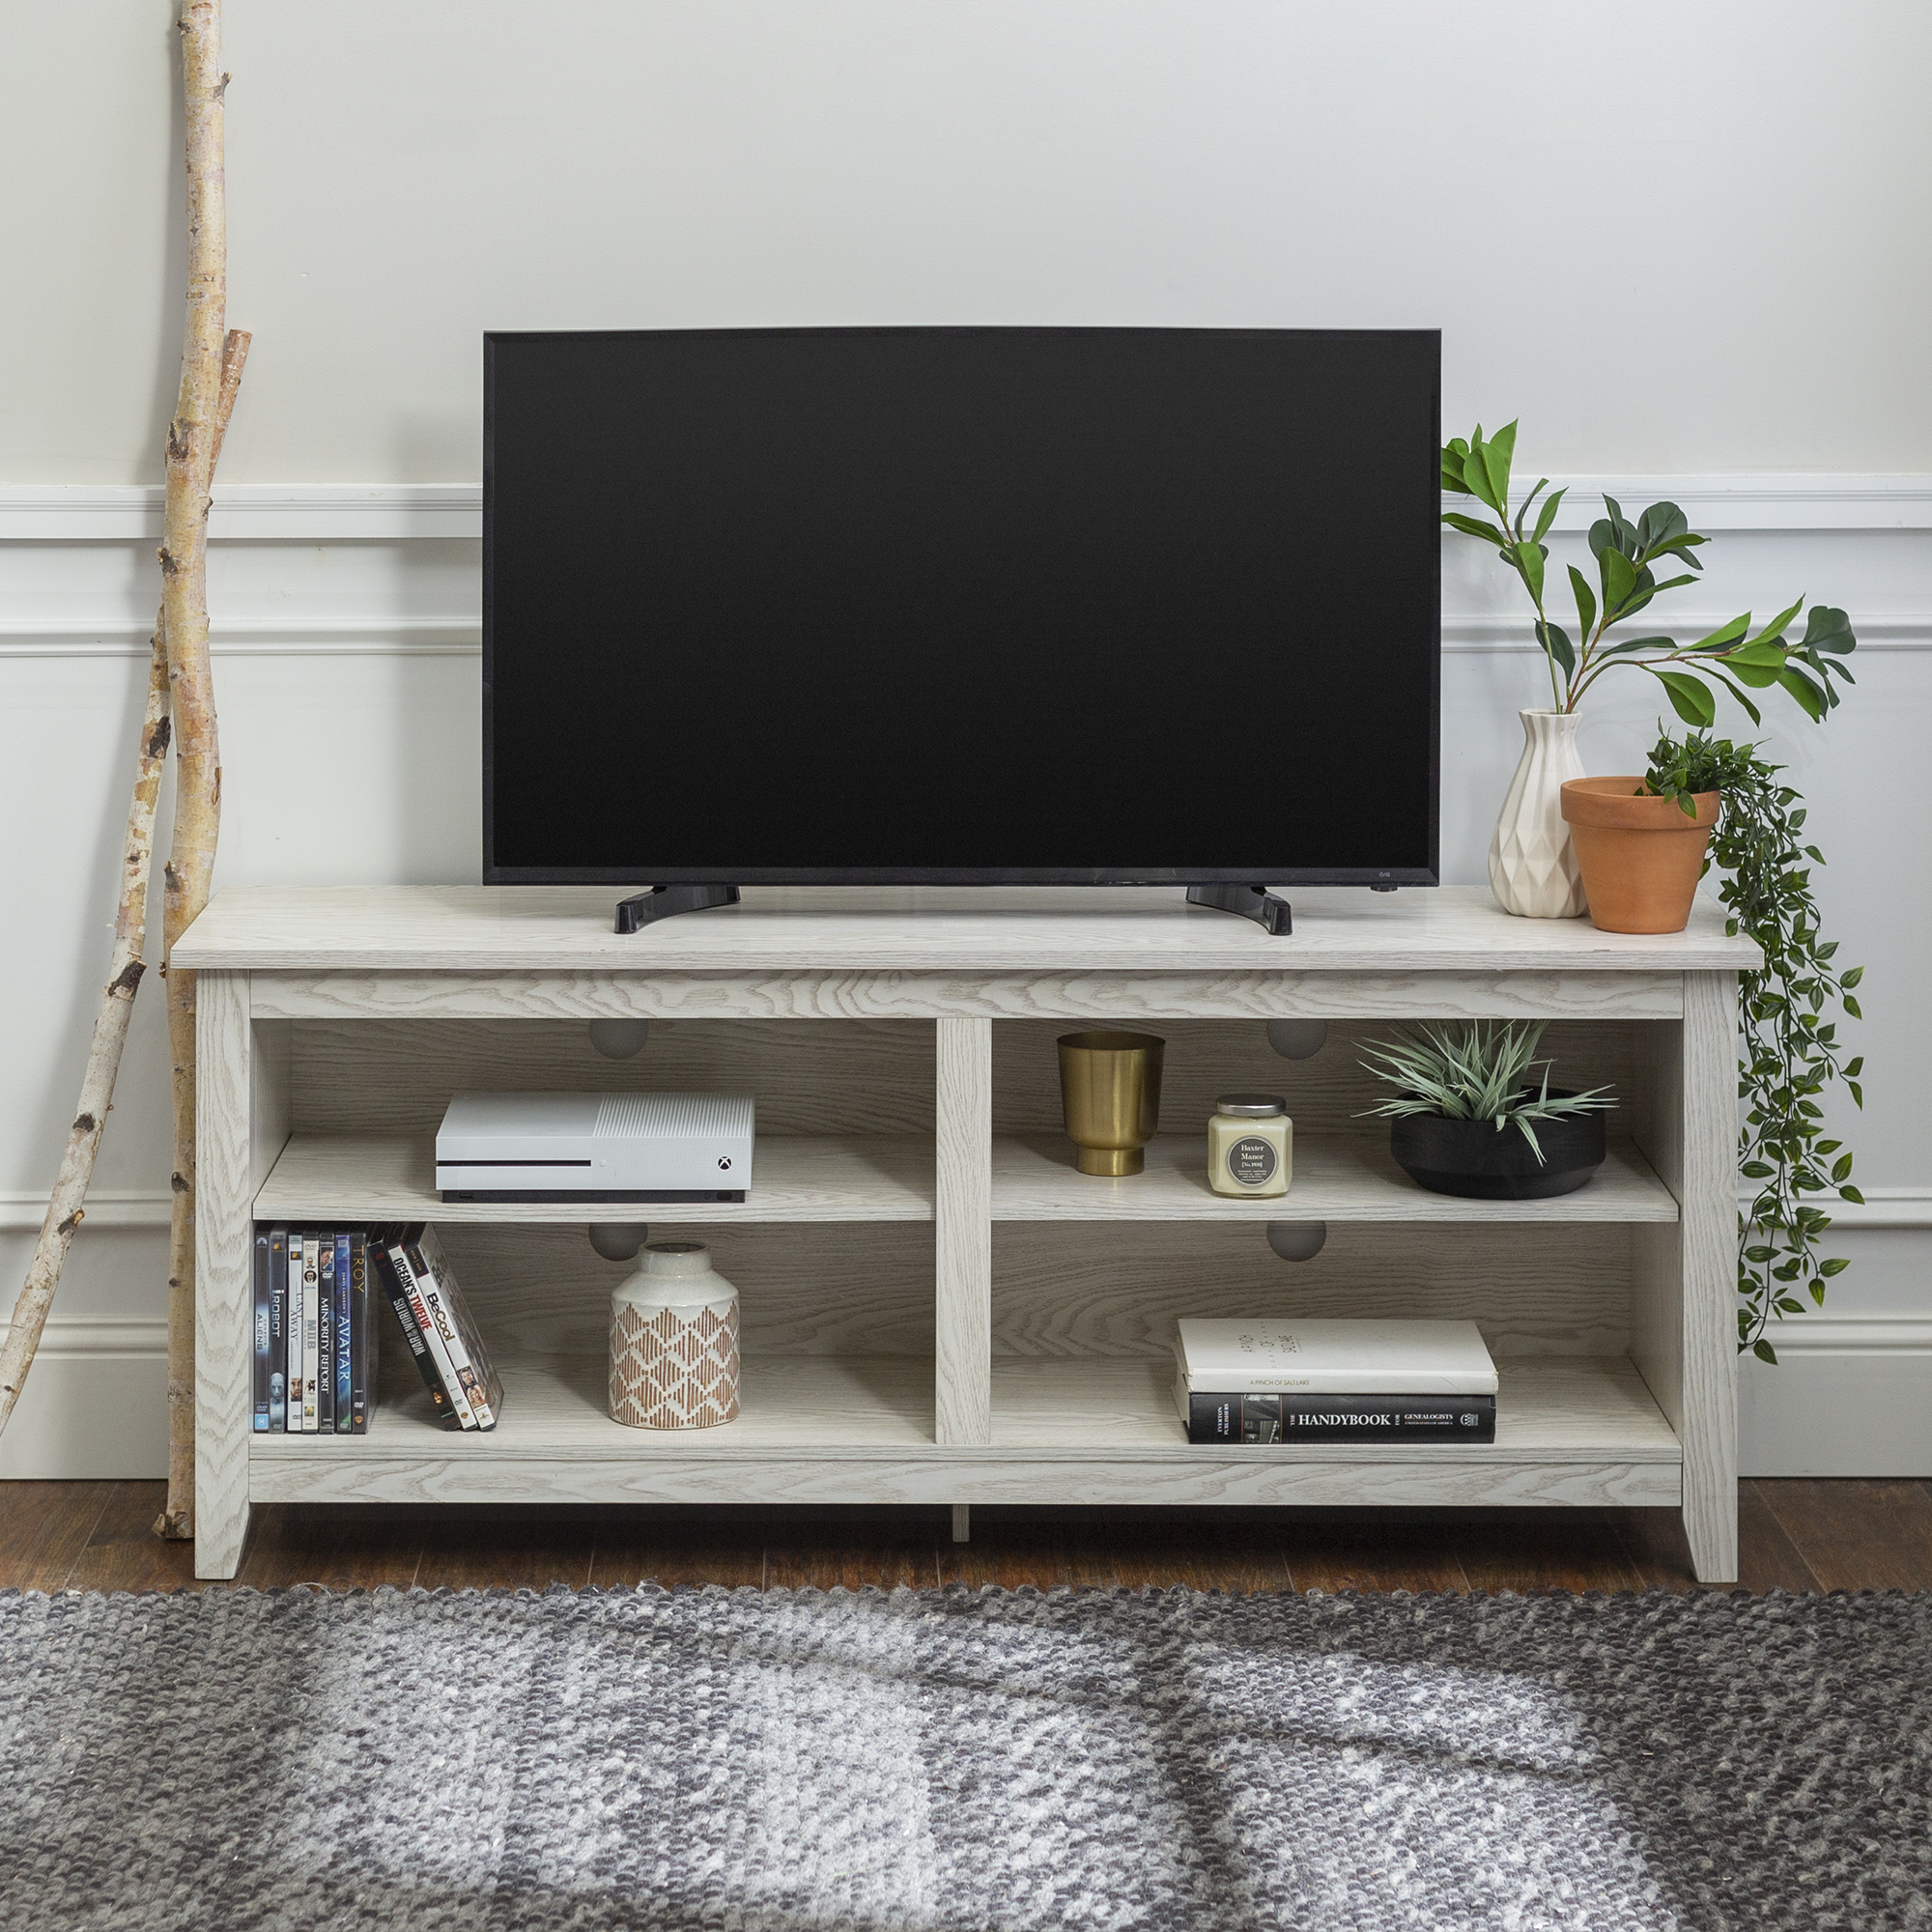 Manor Park Open Storage TV Stand for TVs up to 65", White Wash - image 1 of 11